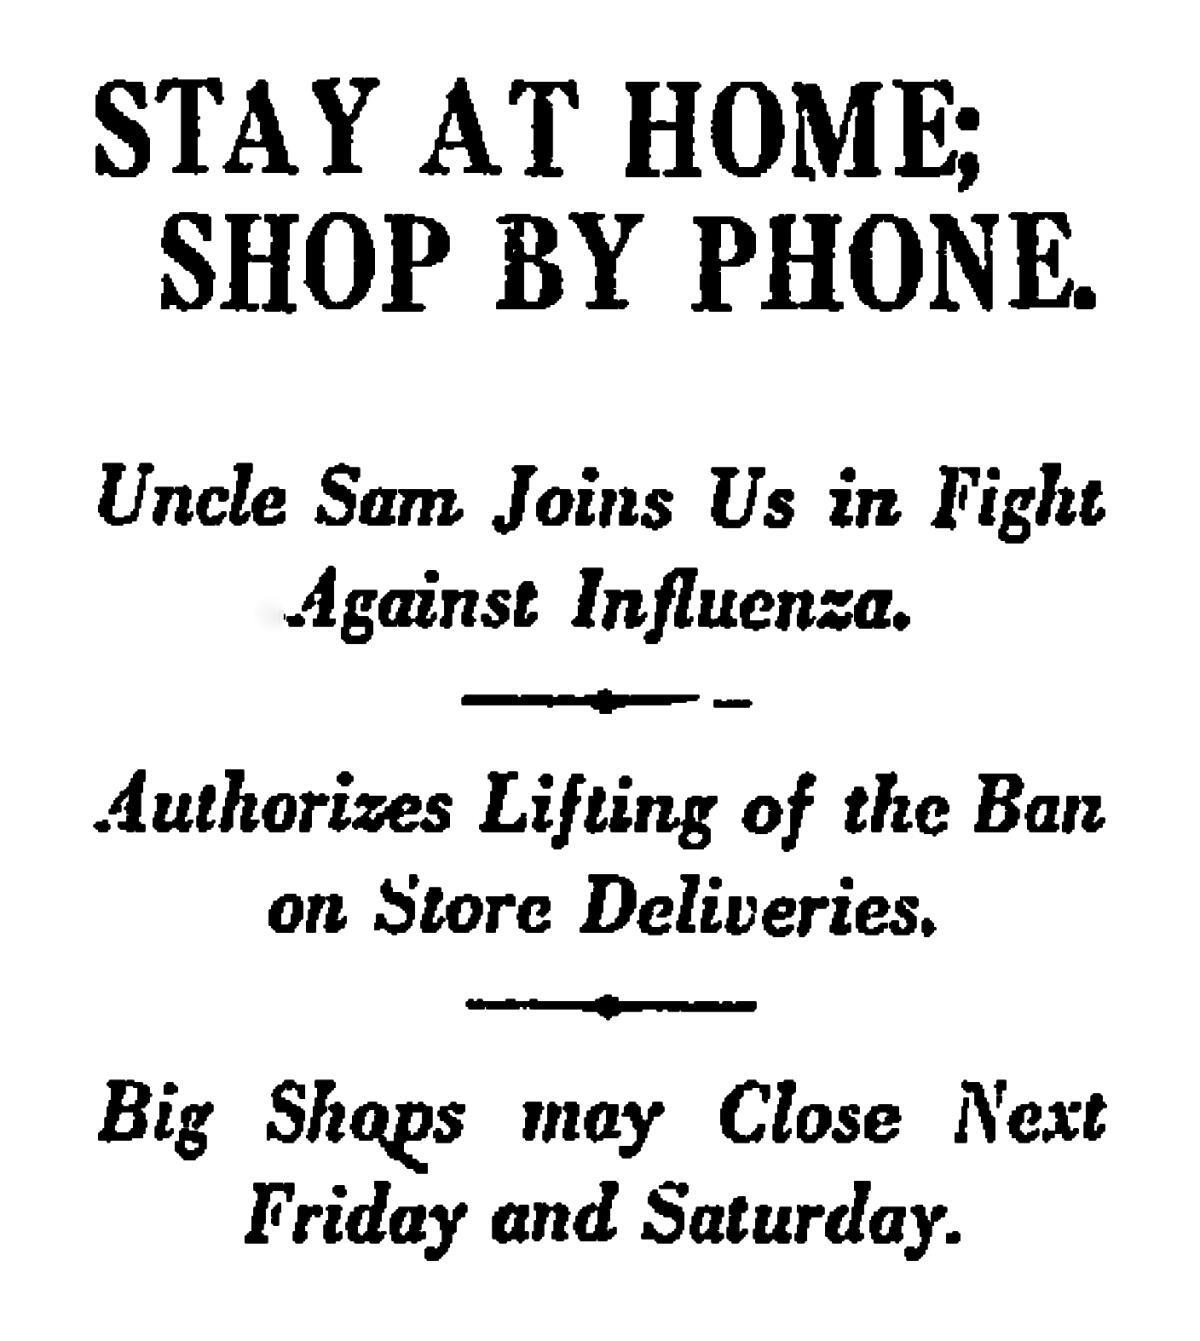 STAY AT HOME; SHOP BY PHONE.: Uncle Sam Joins Us in Fight Against ... Los Angeles Times (1886-1922); Nov 26, 1918; ProQuest Historical Newspapers: Los Angeles Times pg. II1